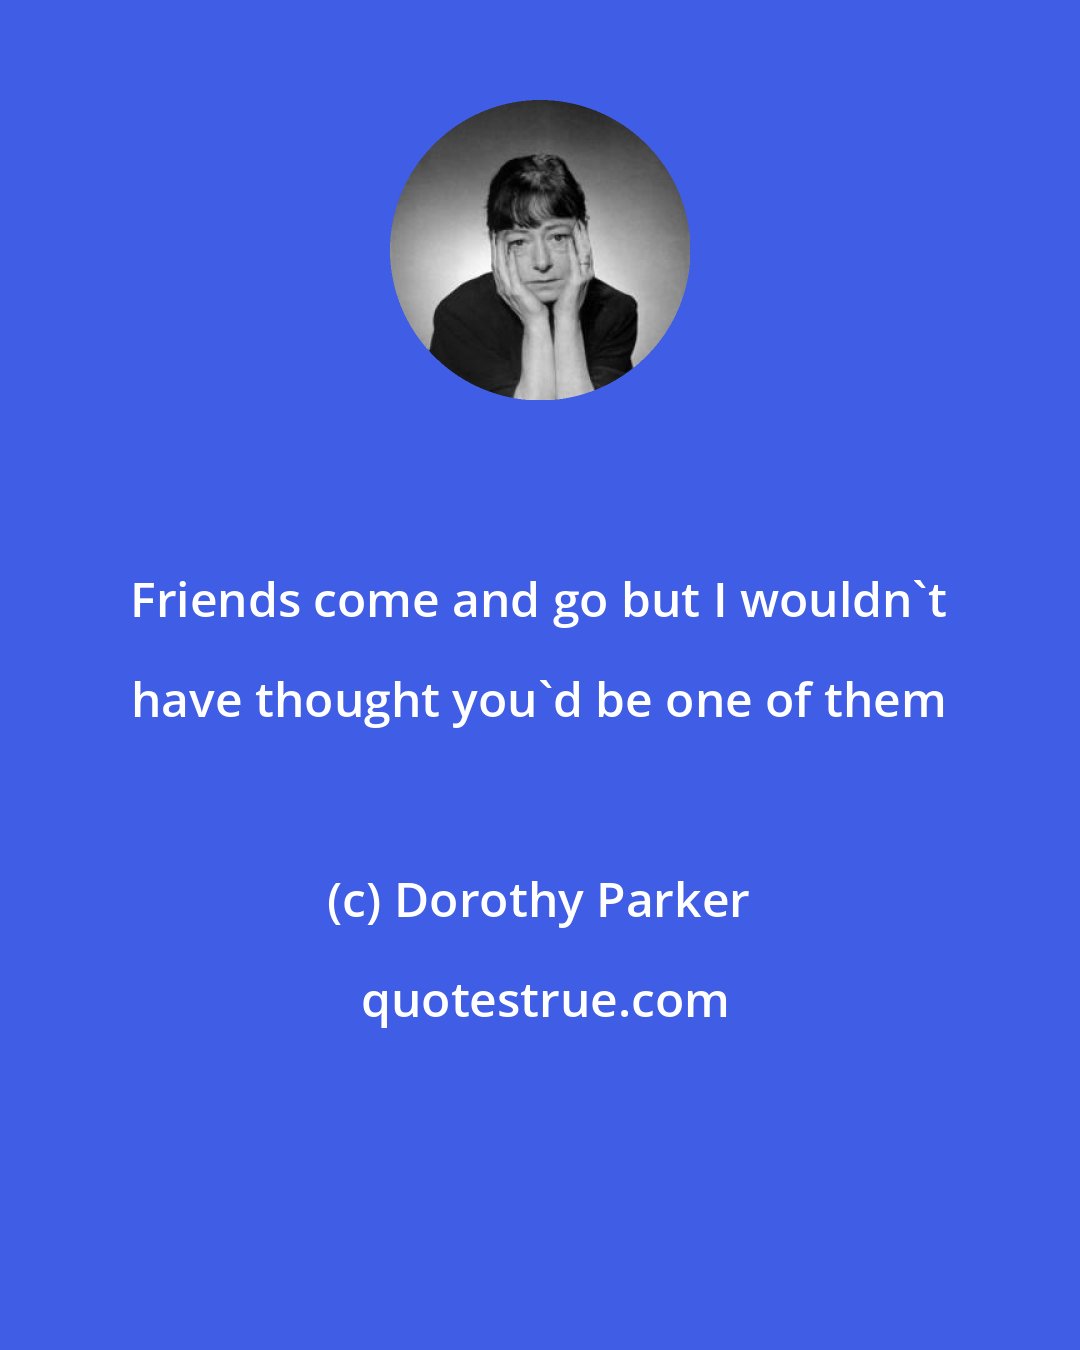 Dorothy Parker: Friends come and go but I wouldn't have thought you'd be one of them